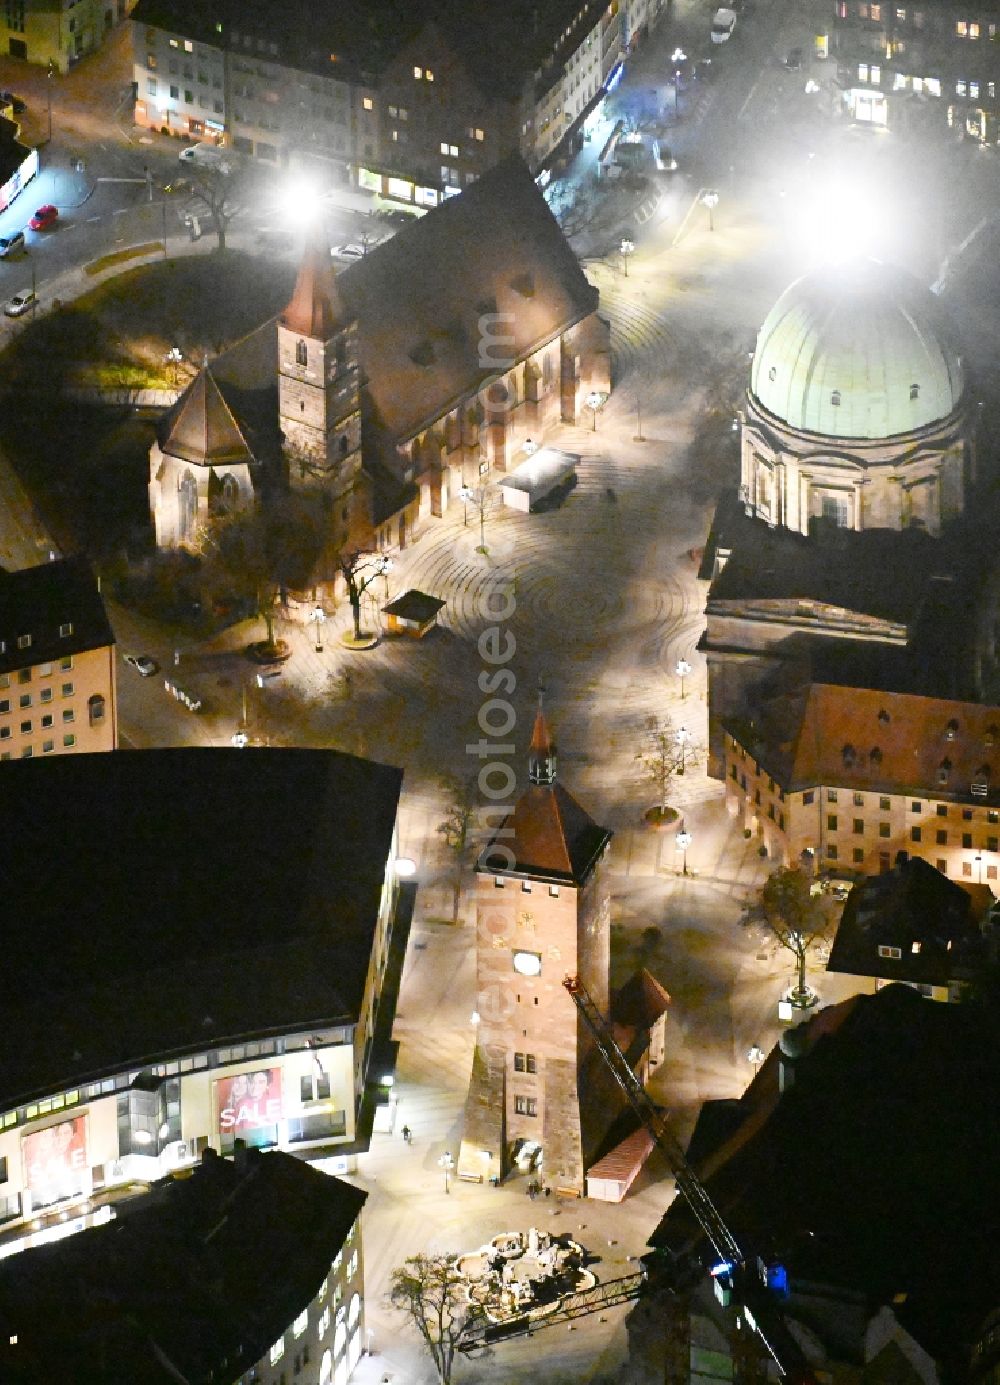 Aerial image at night Nürnberg - Night lighting church St. Elisabethkirche and Tower building Weisser Turm the rest of the former historic city walls in the district Altstadt - Sankt Lorenz in Nuremberg in the state Bavaria, Germany